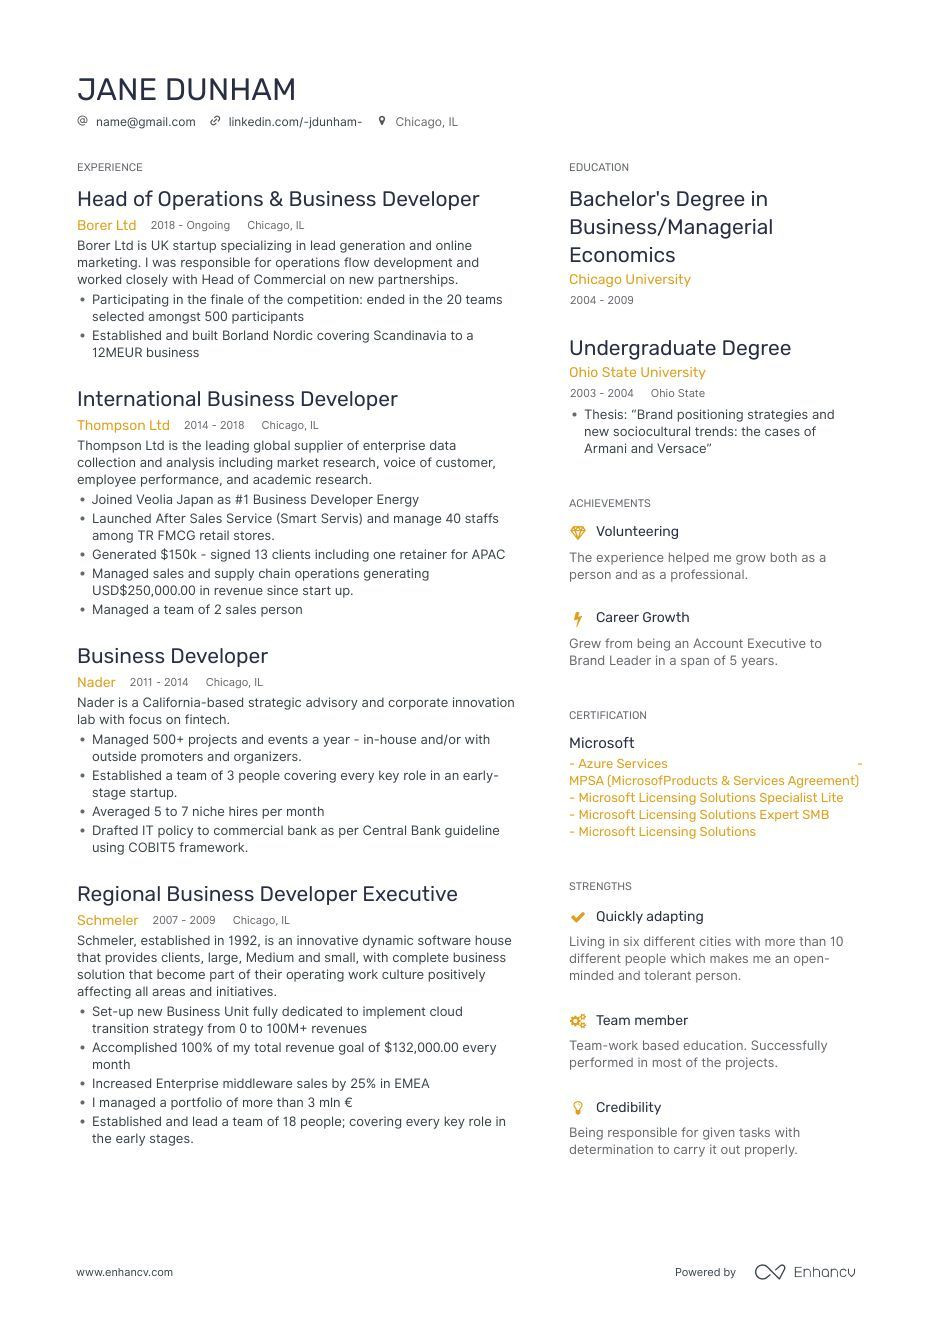 Application Development and Manager and Resume Not Sample Business Development Resume Samples [4 Templates   Tips] (layout …